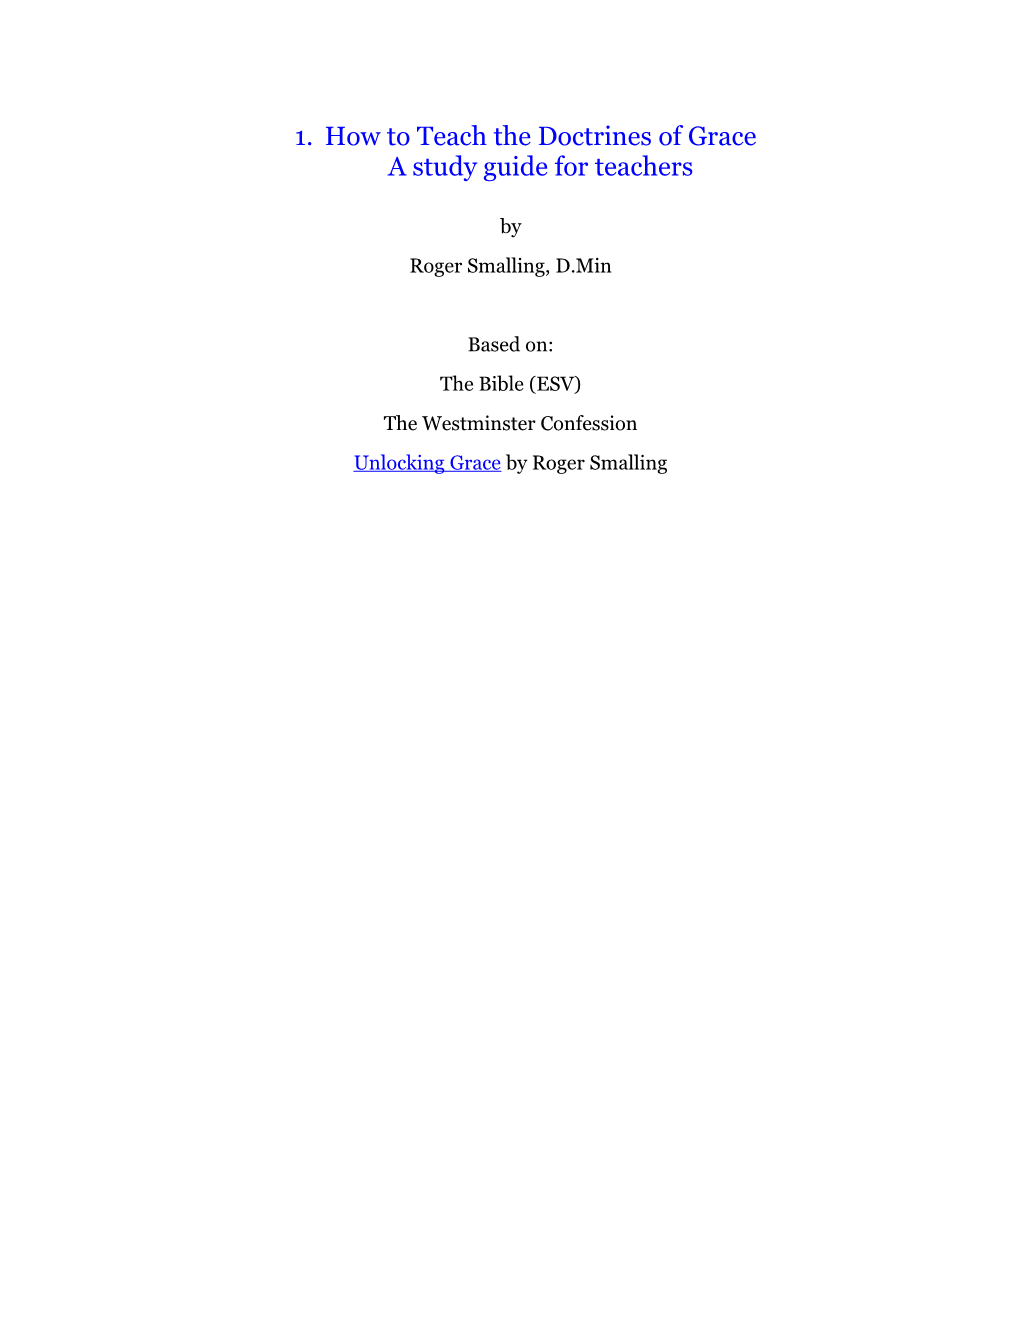 How to Teach the Doctrines of Gracea Study Guide for Teachers